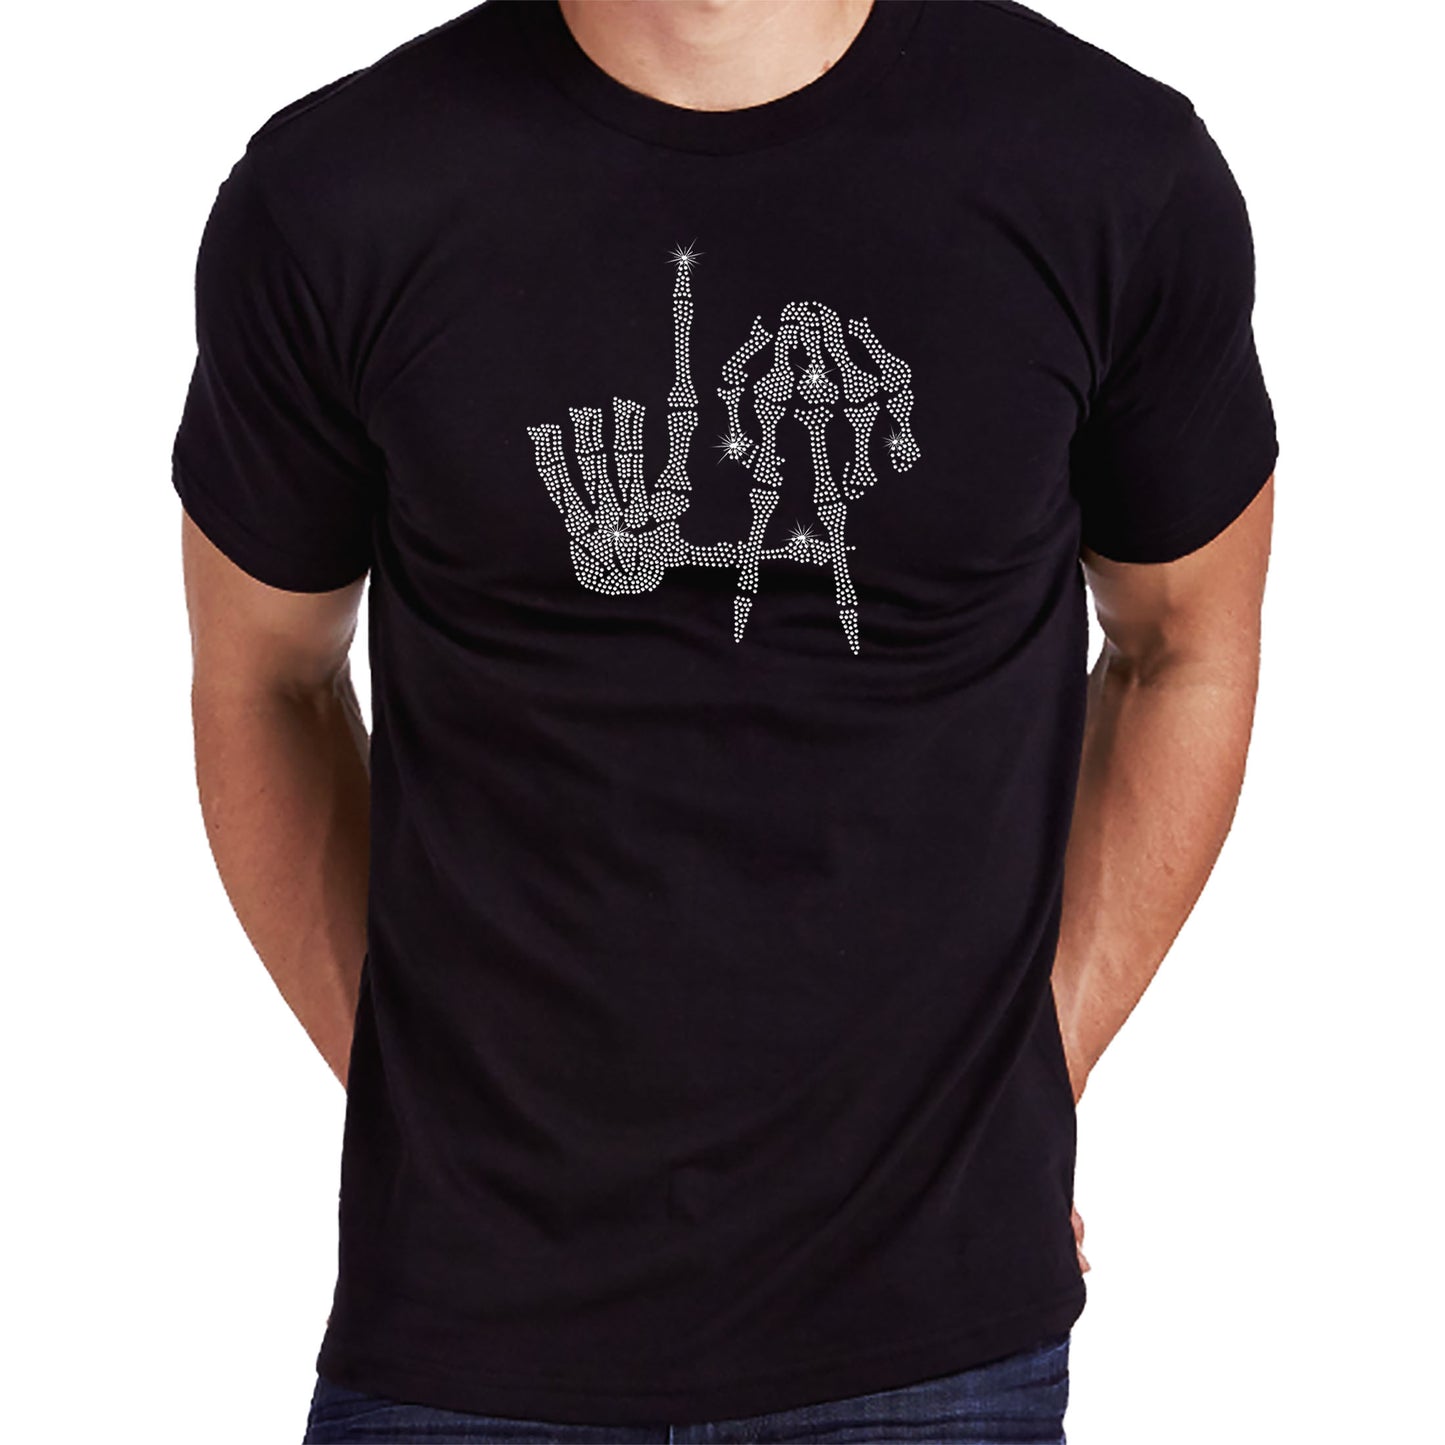 Men's Rhinestone T-Shirt with " Skeleton Hands with LA " Sizes Small to 3X